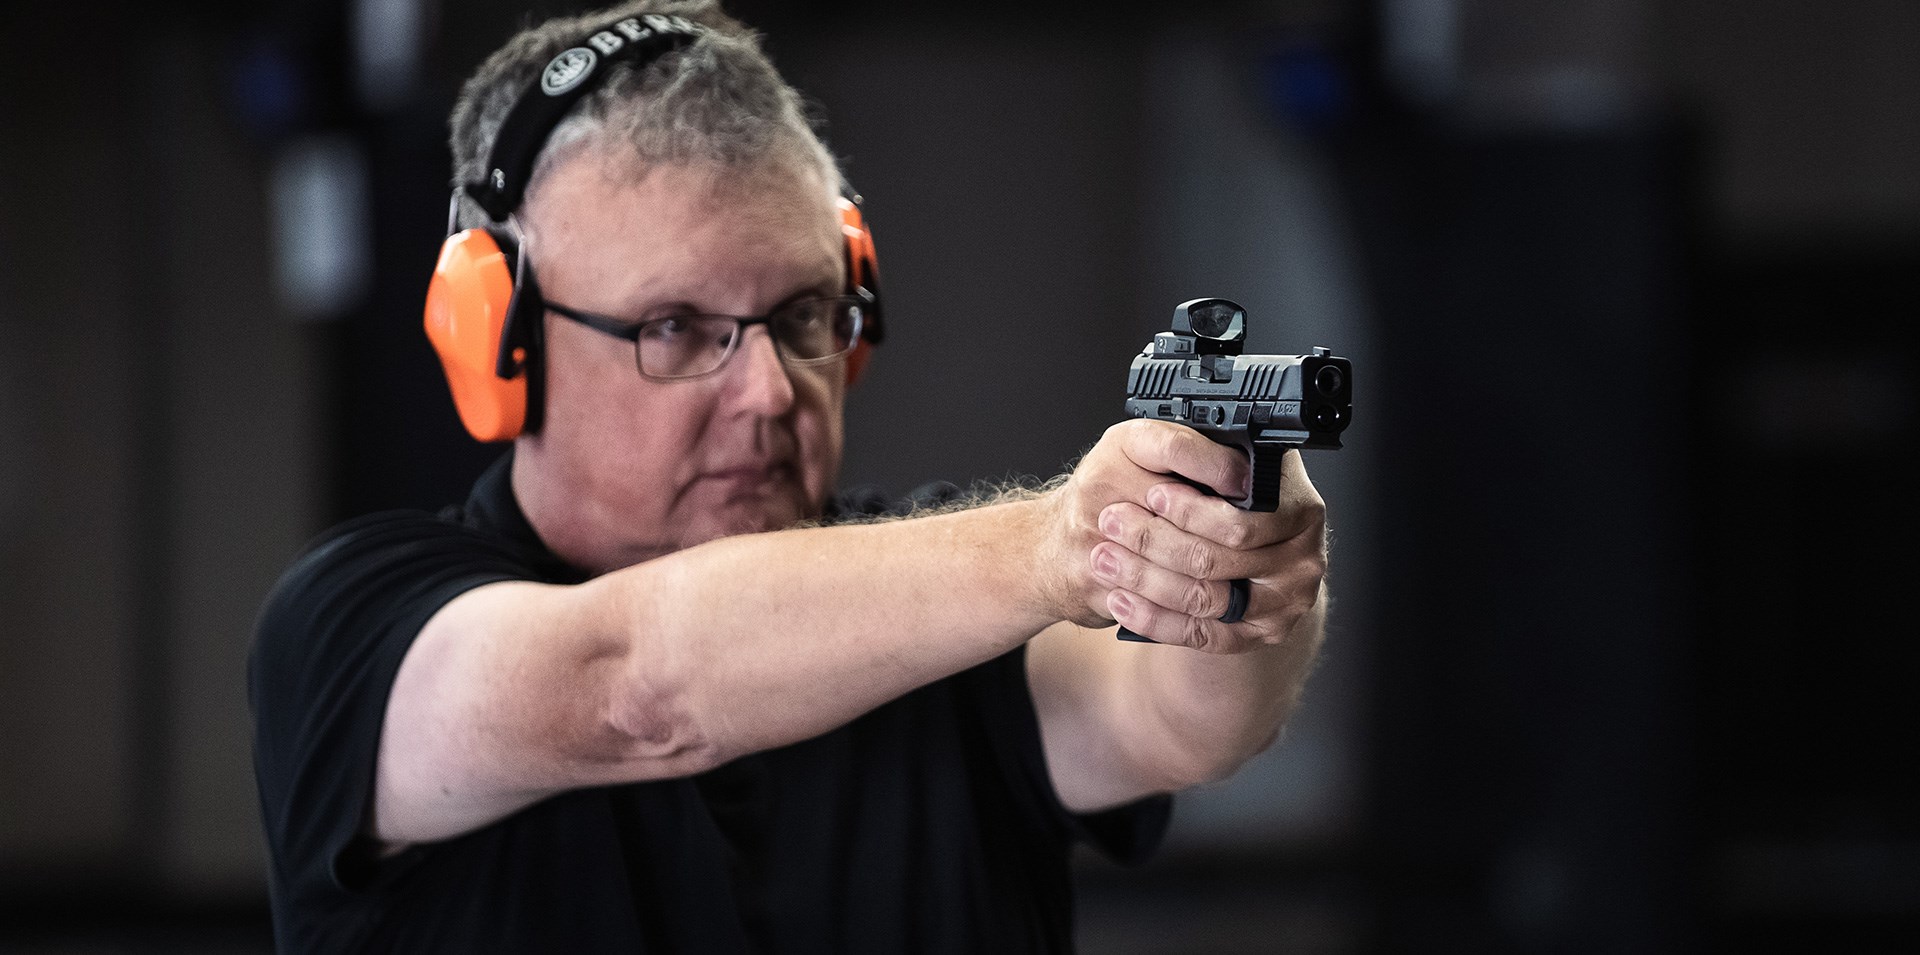 First Look: Beretta Apx A1 Fs | An Official Journal Of The Nra